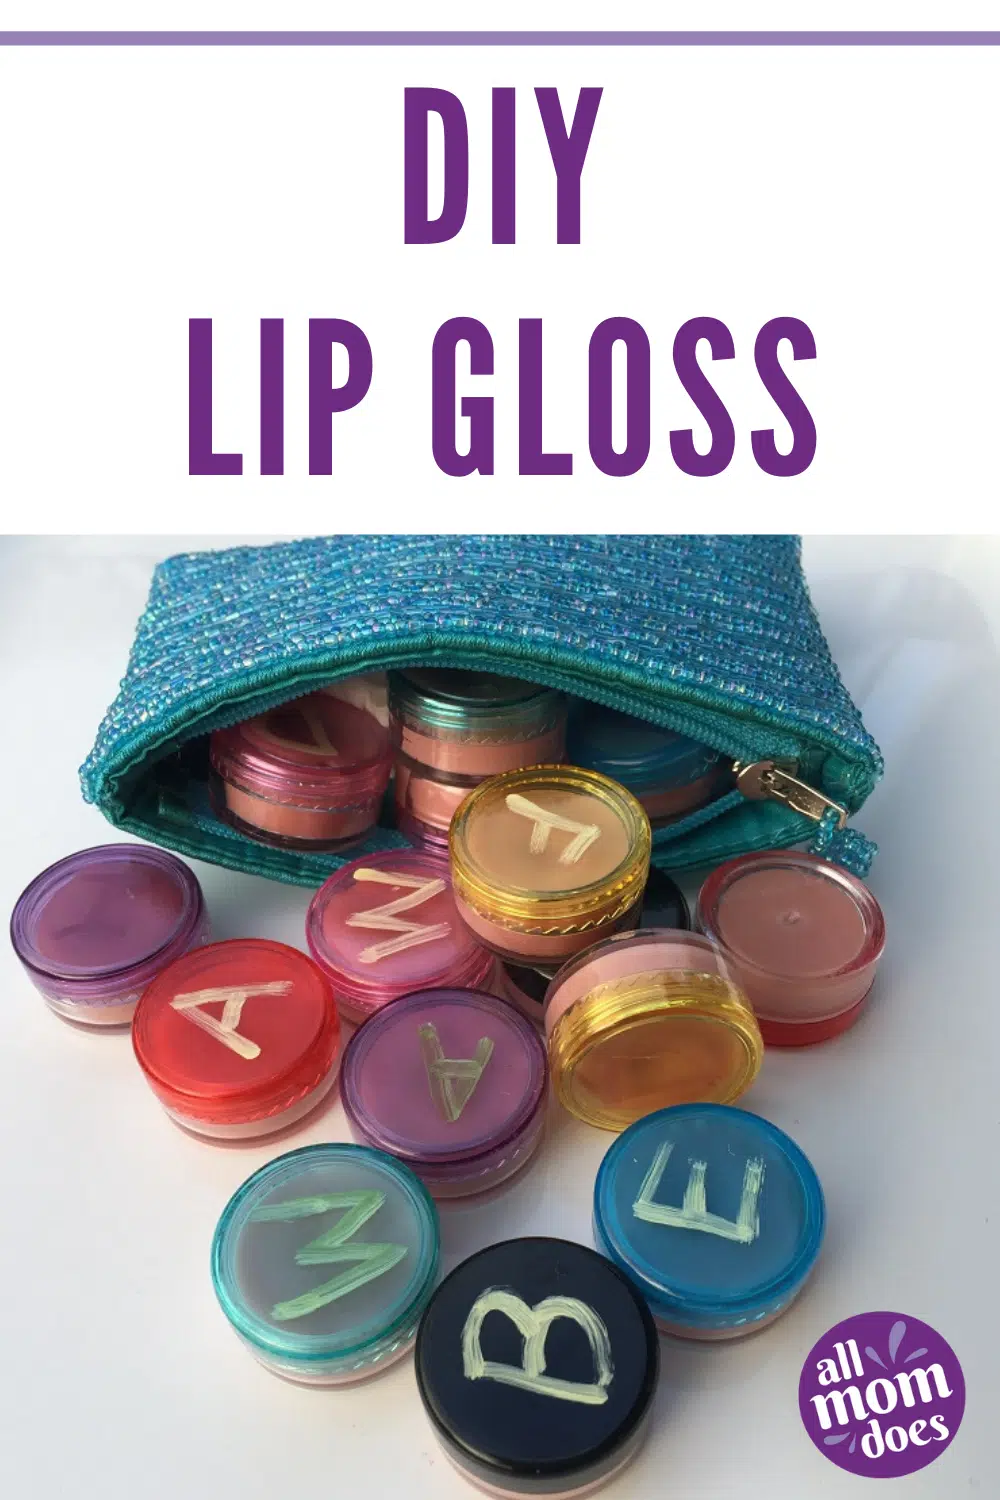 How to make lip gloss! - Free stories online. Create books for kids